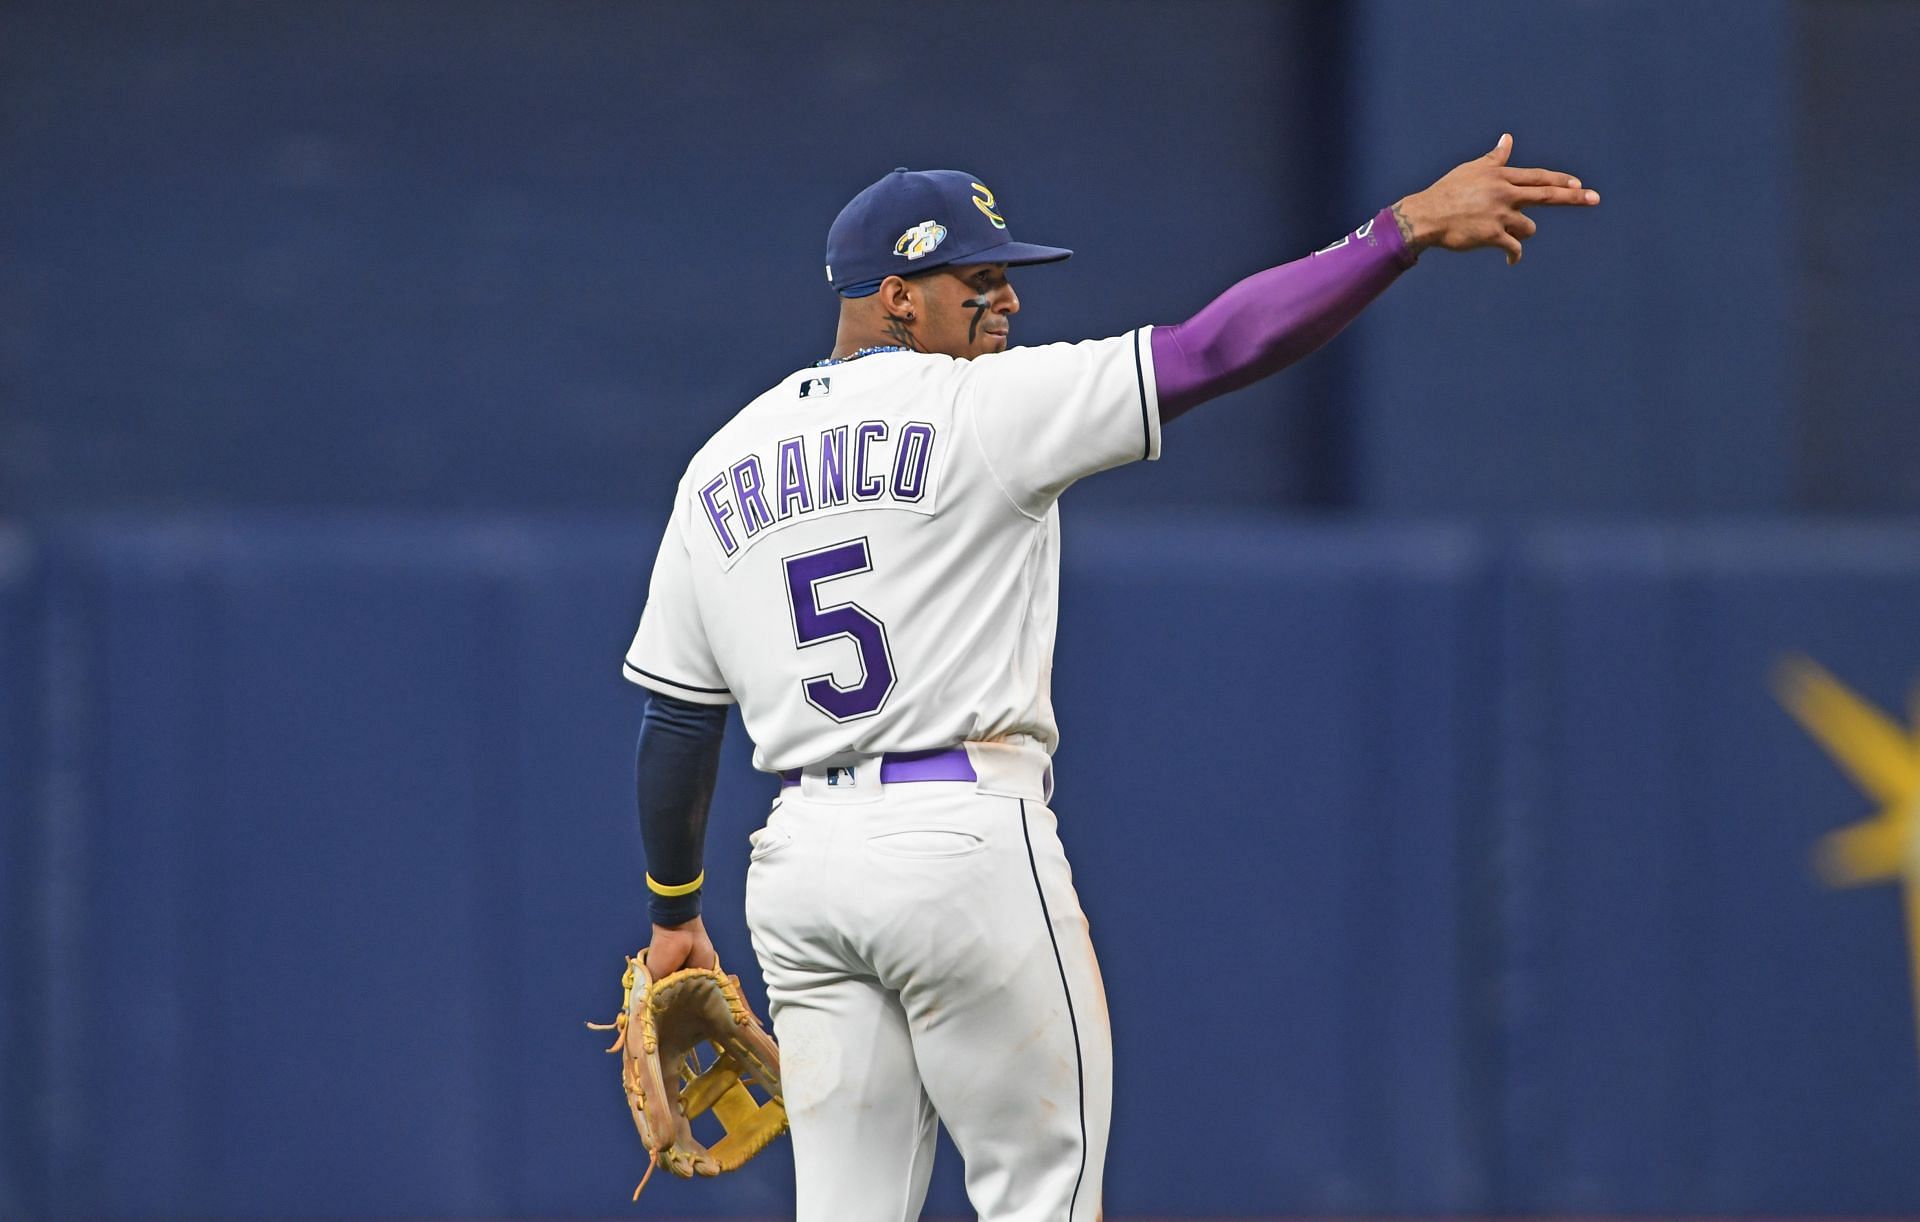 The Rays are unlikely to get Wander Franco back